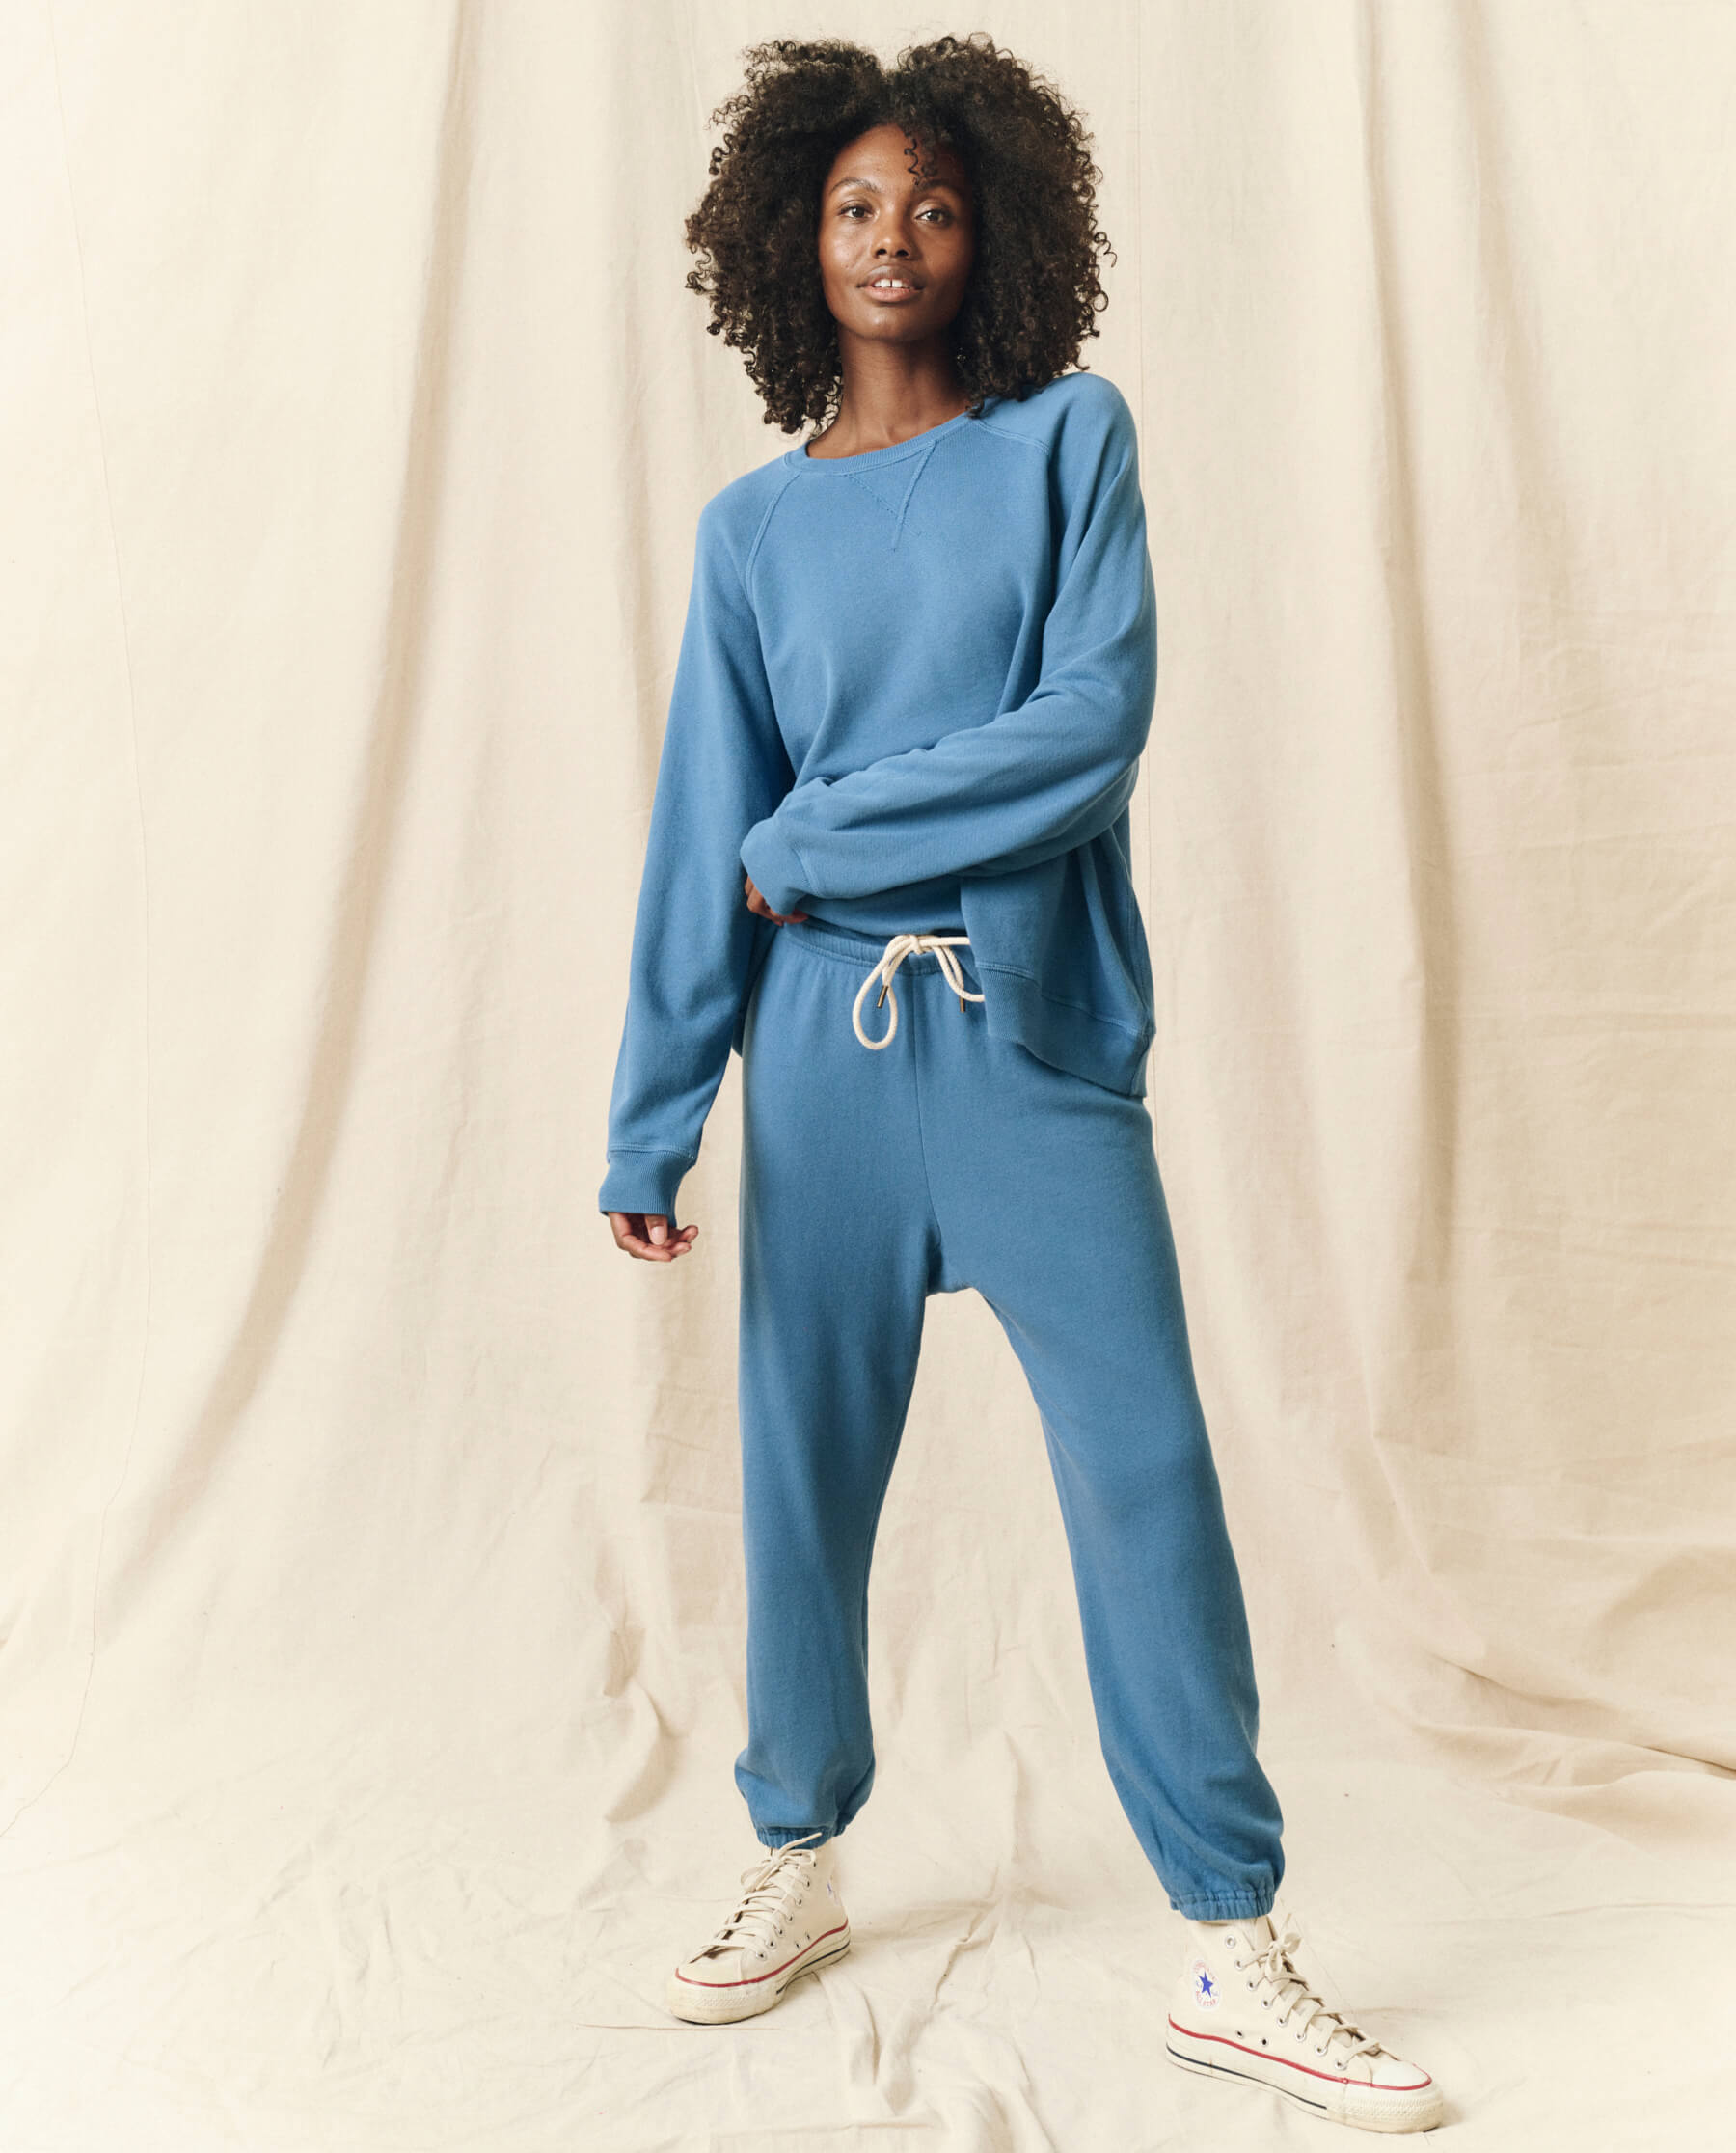 The Stadium Sweatpant. Solid -- Glacier Blue SWEATPANTS THE GREAT. HOL 23 KNITS